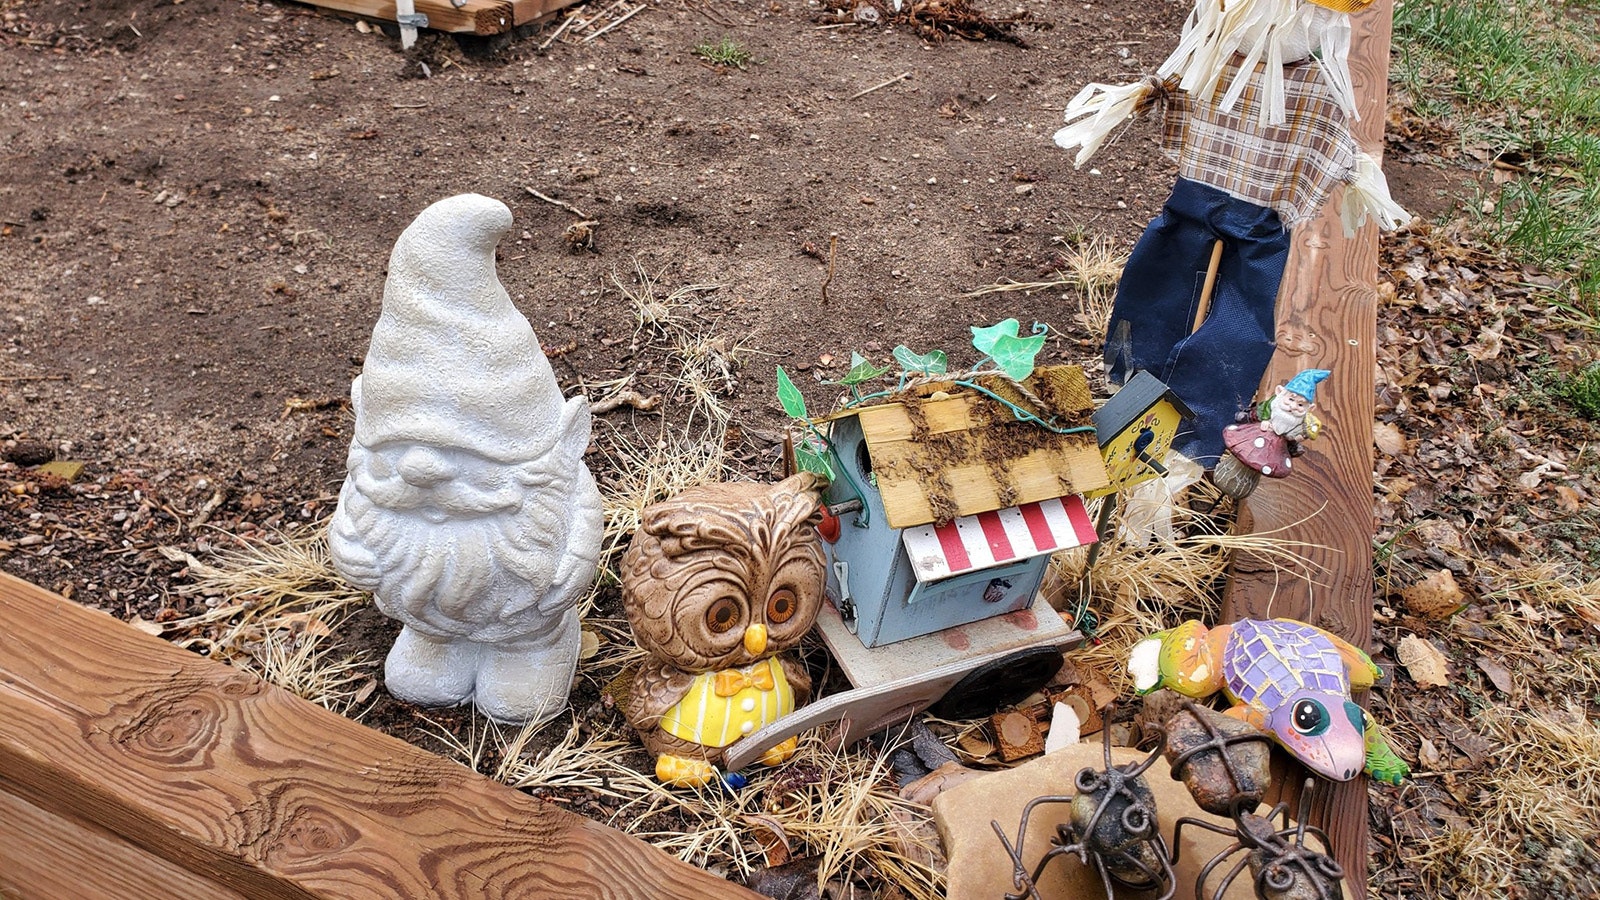 When Lydia Mullins saw a Facebook post about someone's garden gnome being stolen, she replaced it with a new garden guardian.